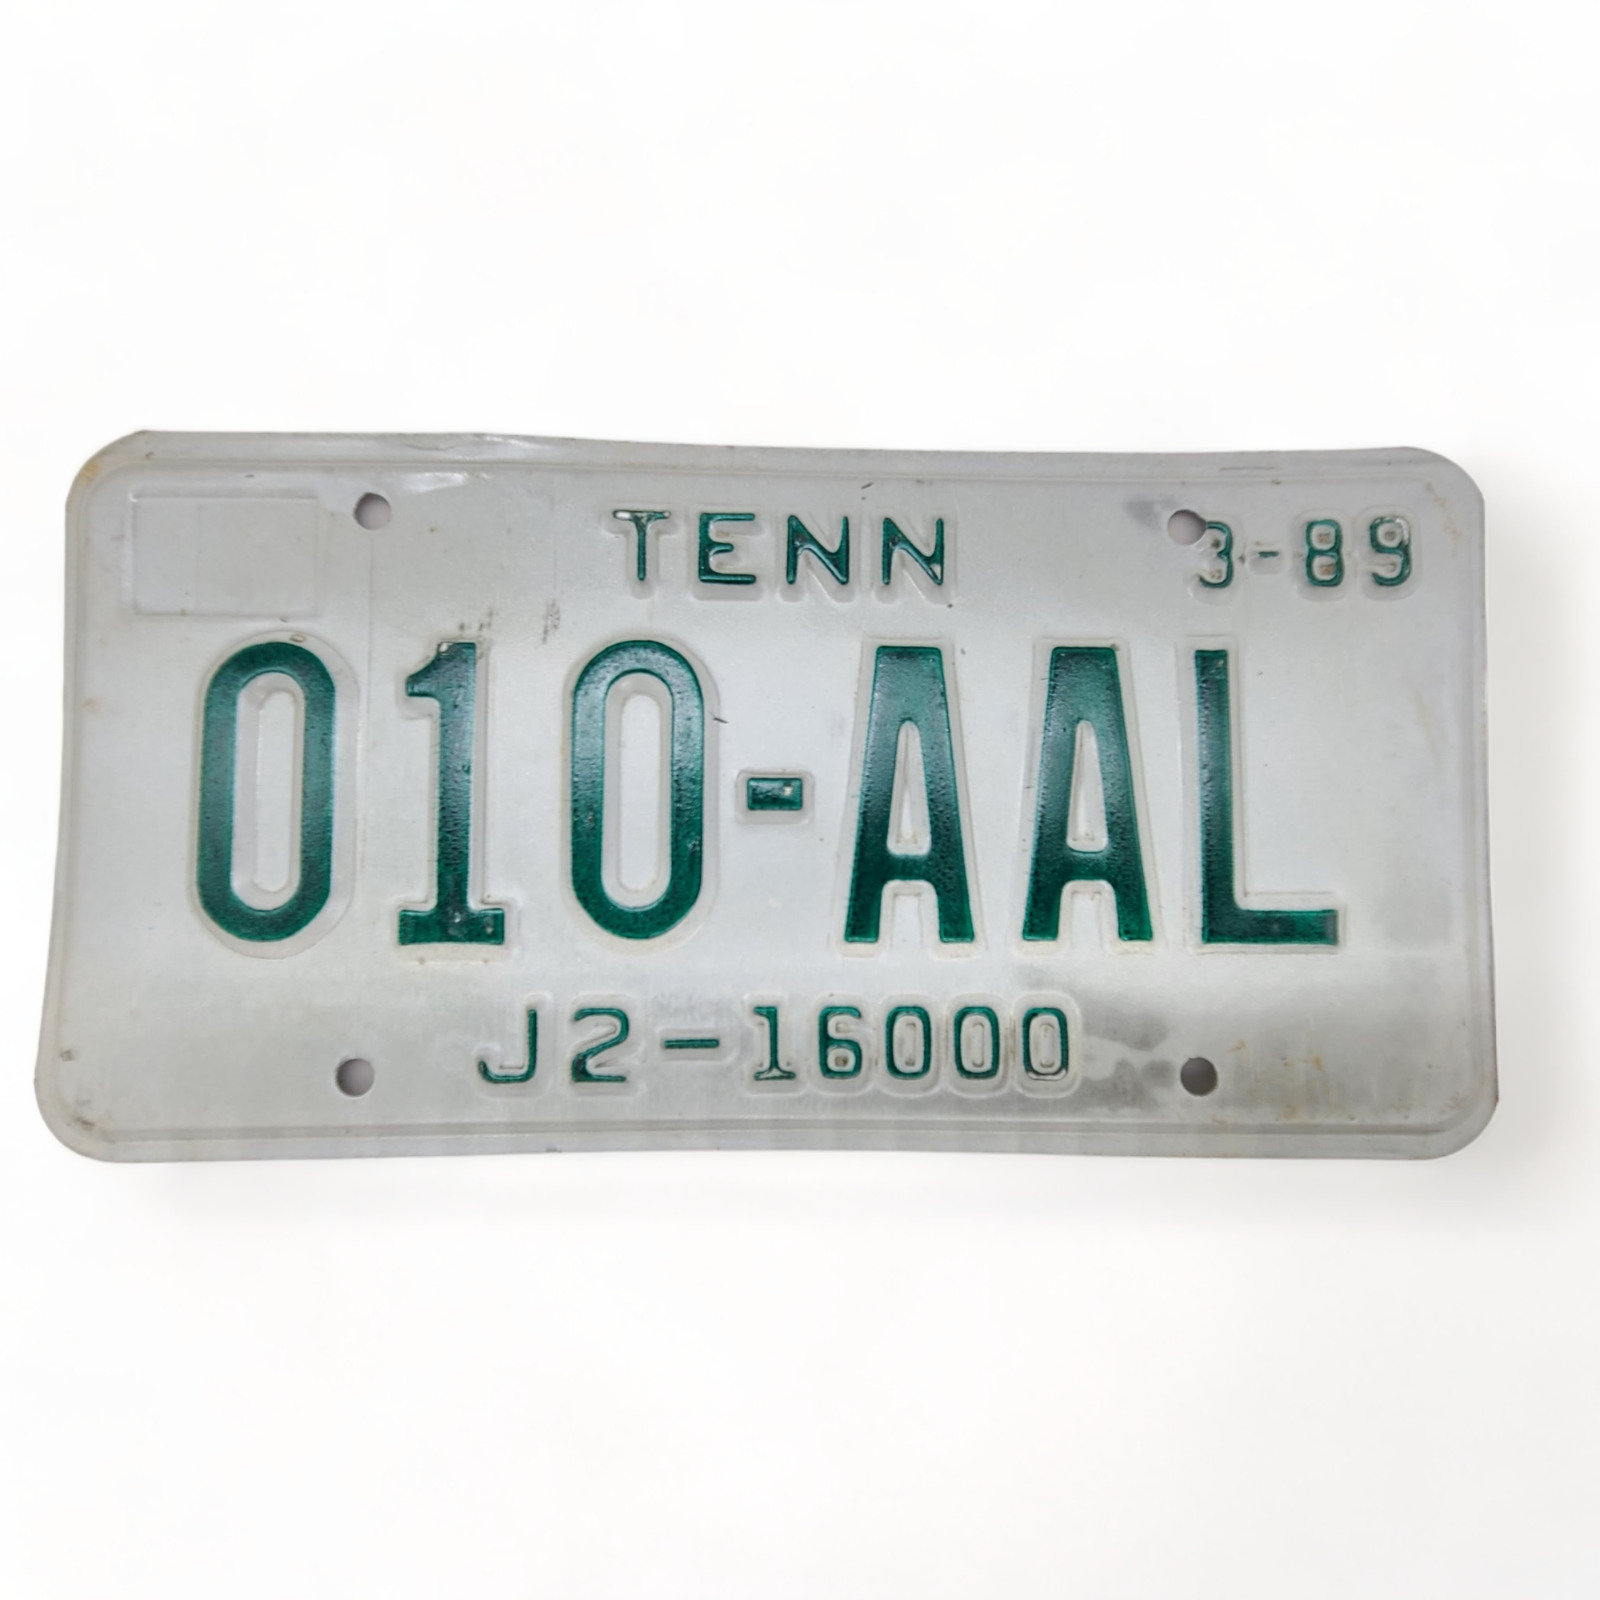 1989 Tennessee Metal License Plate Green On White #010-AAL